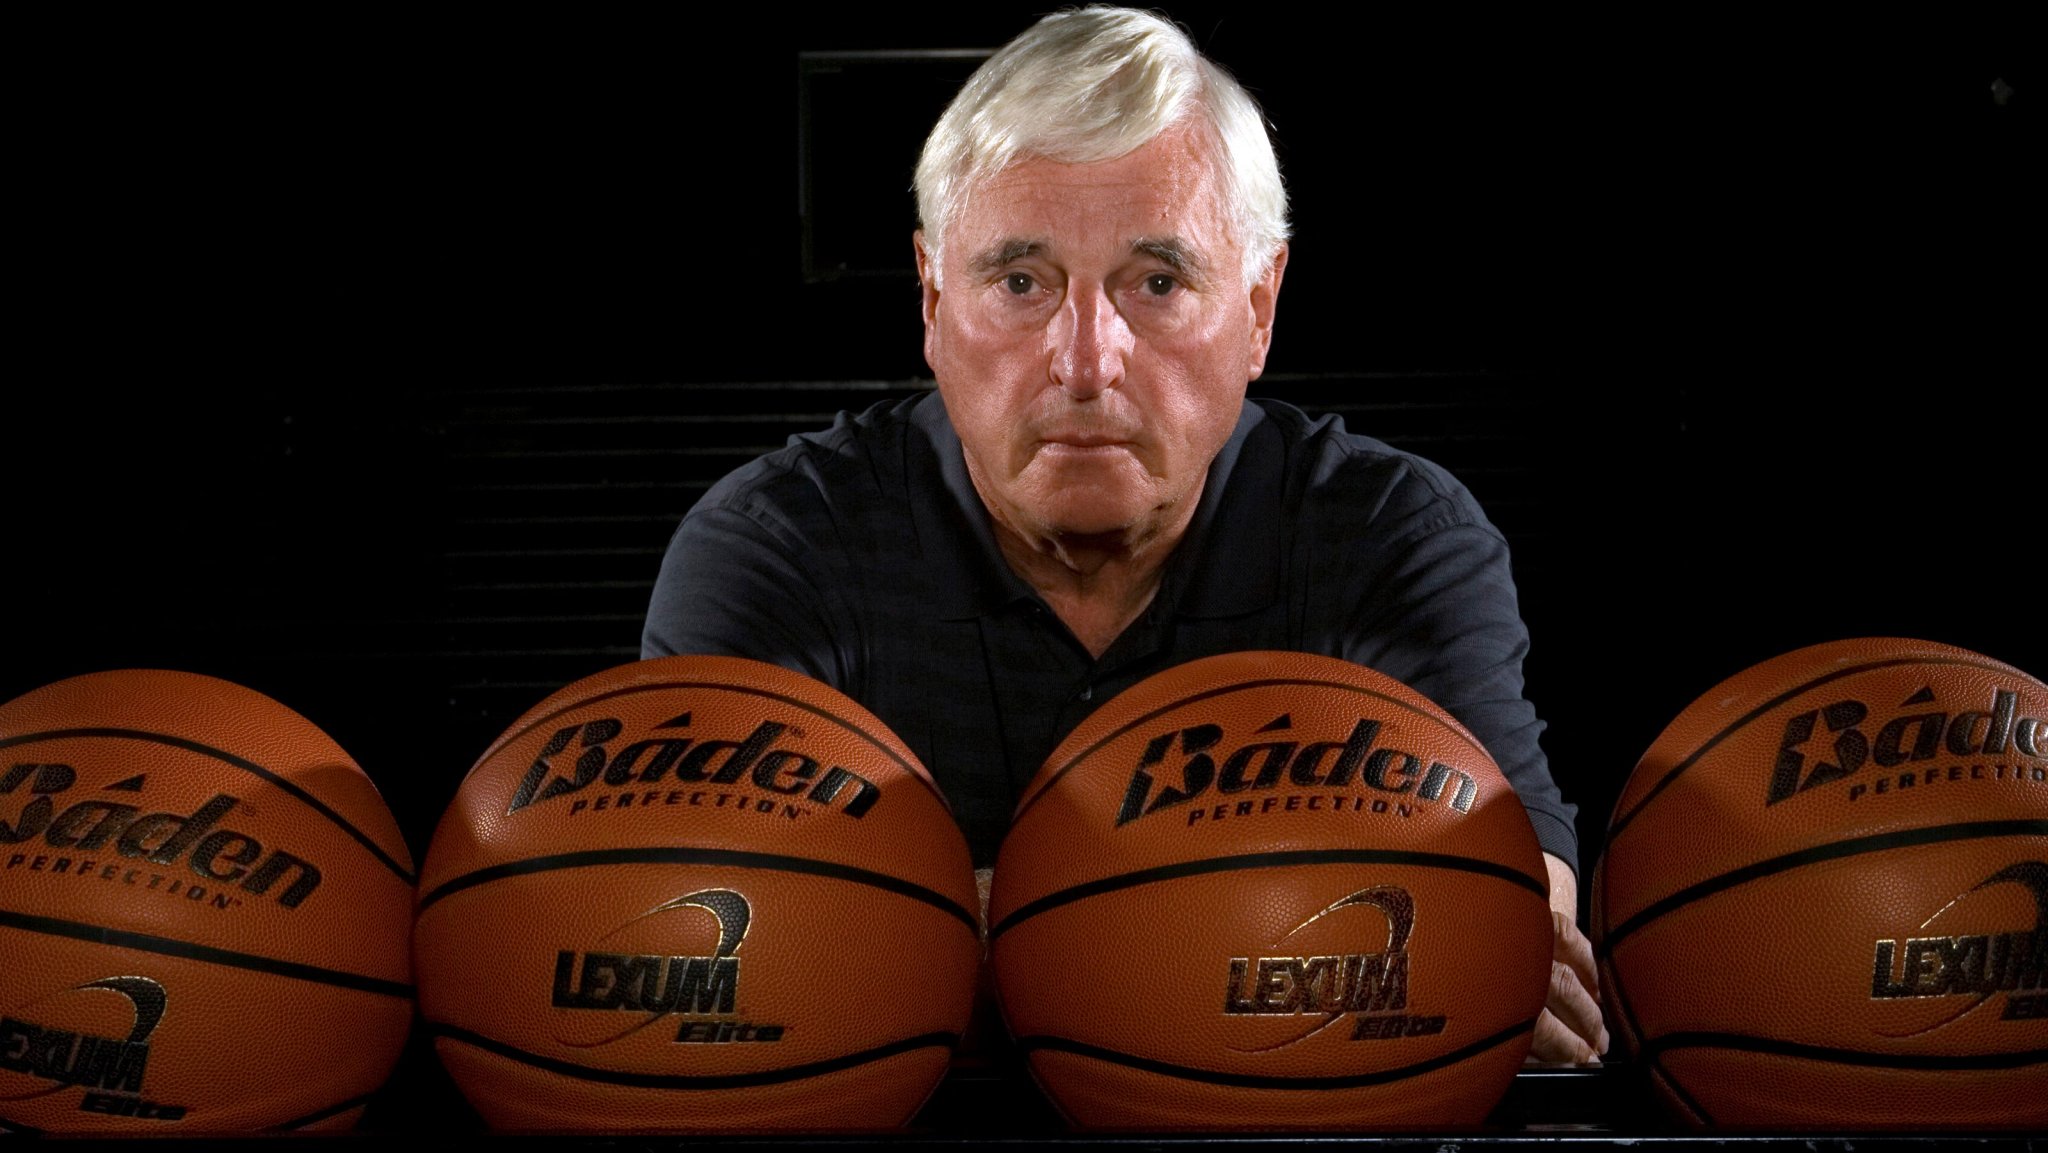 PHOTOS: Bob Knight, legendary and boisterous college basketball coach, through the years